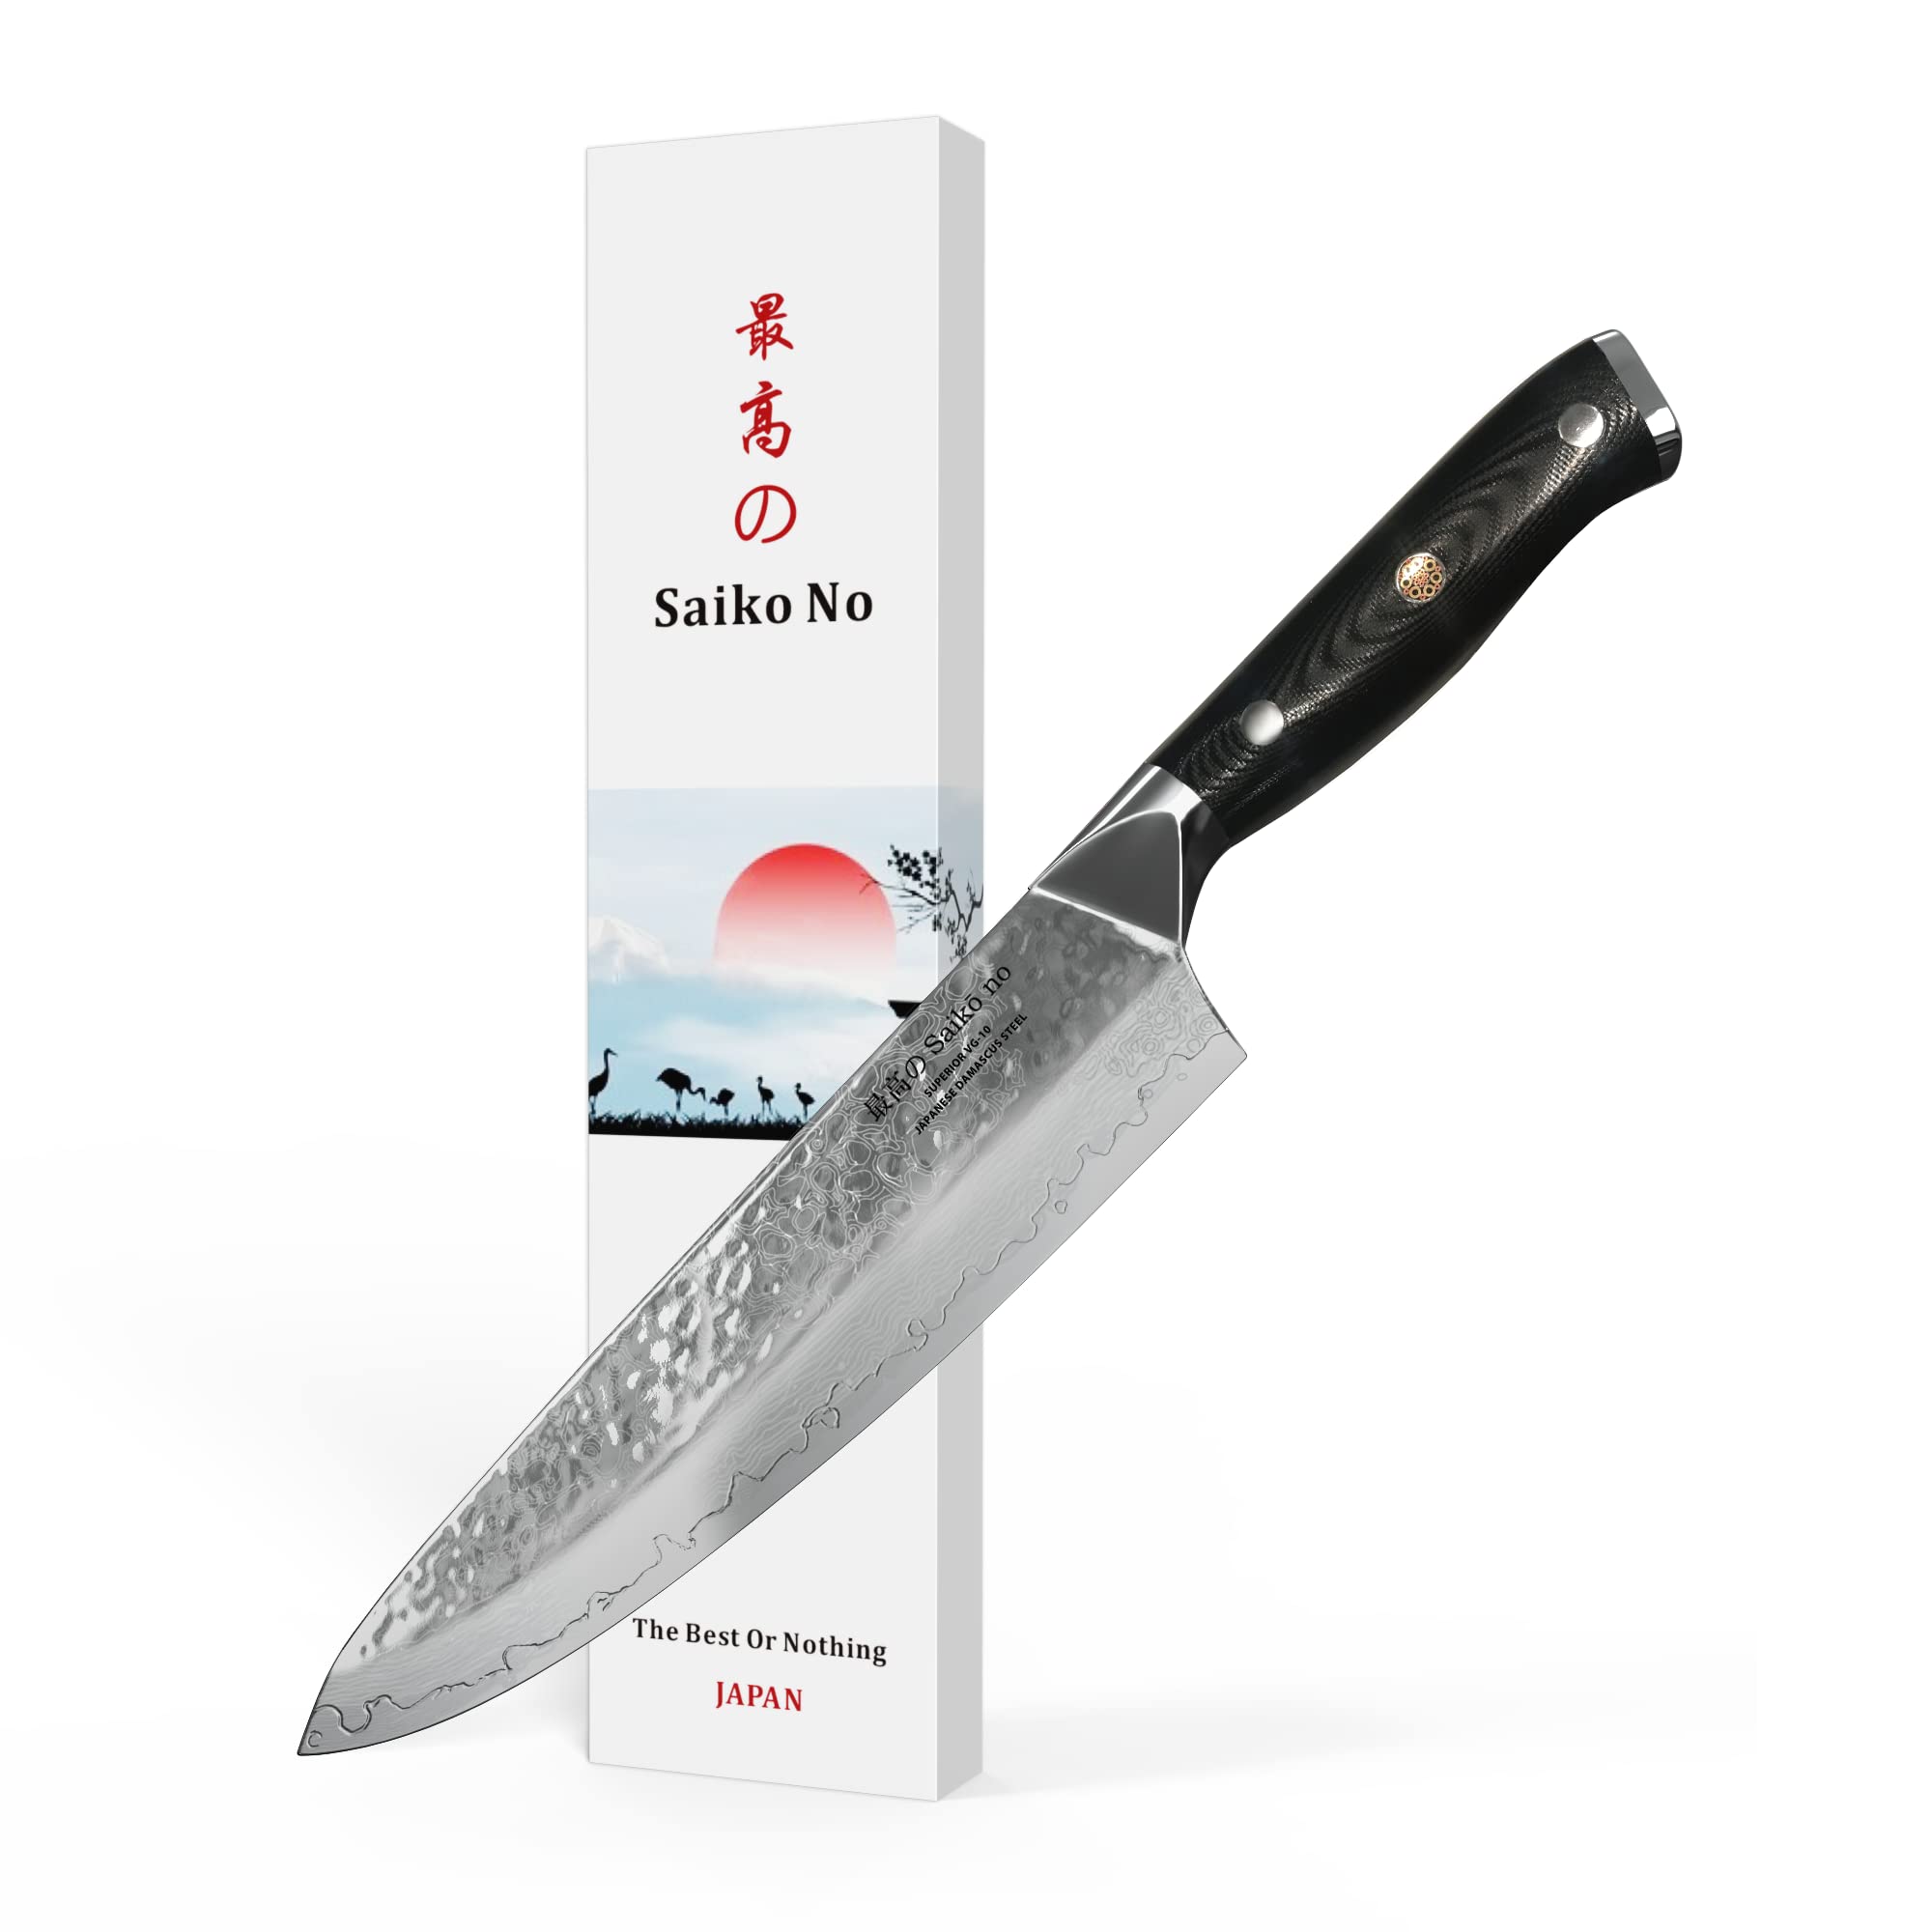 SAIKO NO 8 Inch Knife – 8 Inch Chef Knife with Sheath and Gift Box – Ultra Sharp VG10 Japanese Steel 8in Chef Knife – 8 Inch Kitchen Knife – 8 Inch Japanese Chef Knife